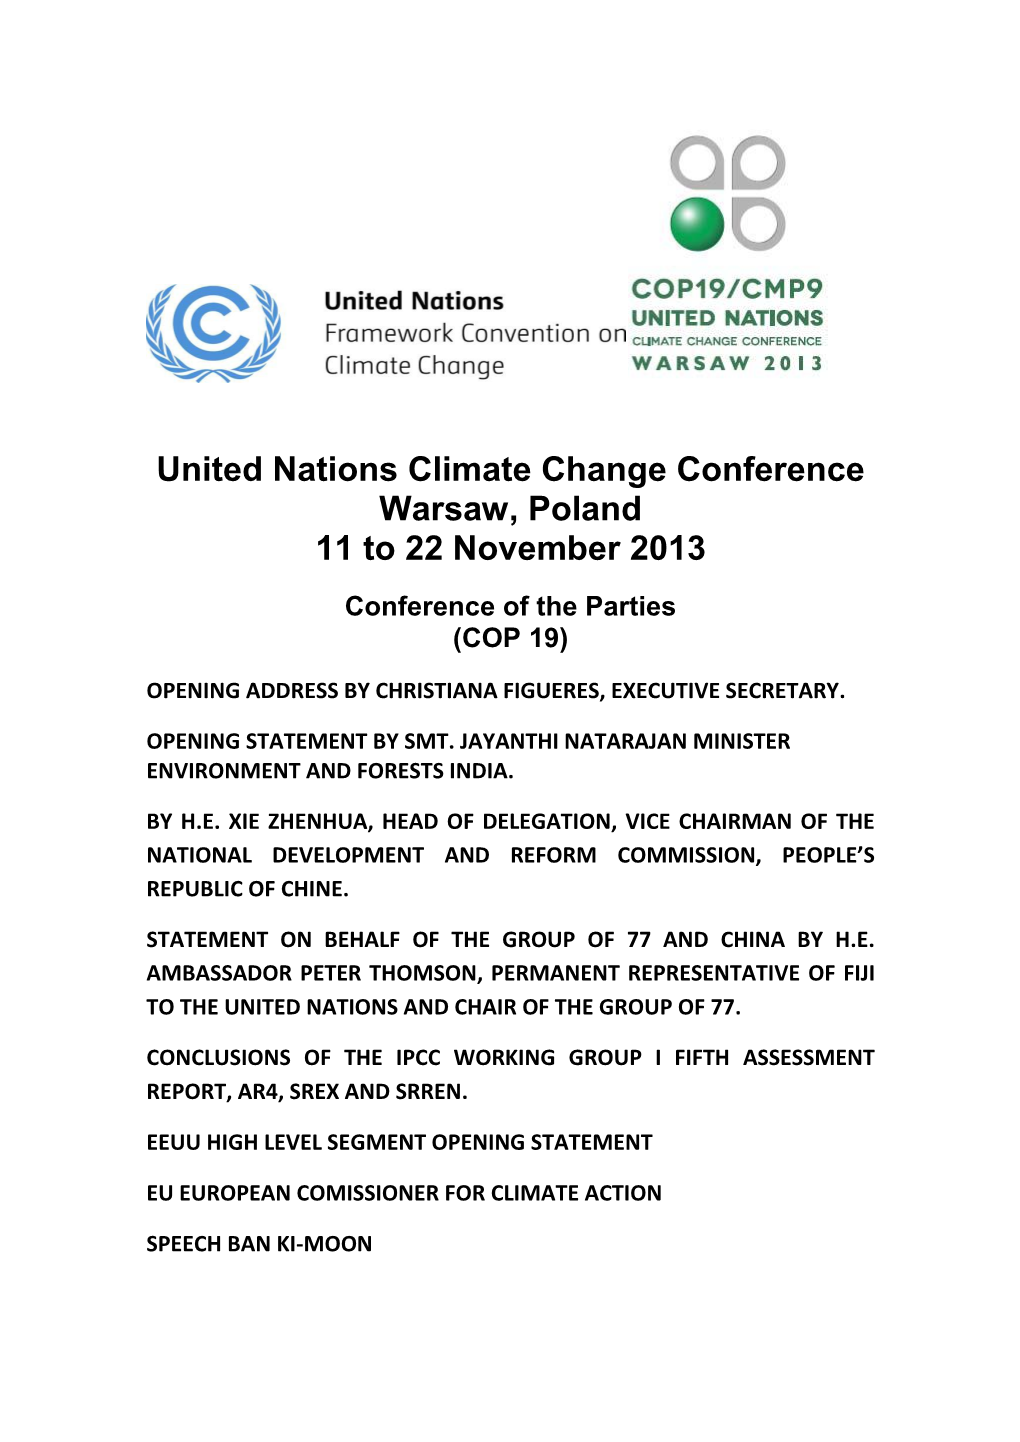 United Nations Climate Change Conference Warsaw, Poland 11 to 22 November 2013 Conference of the Parties (COP 19)